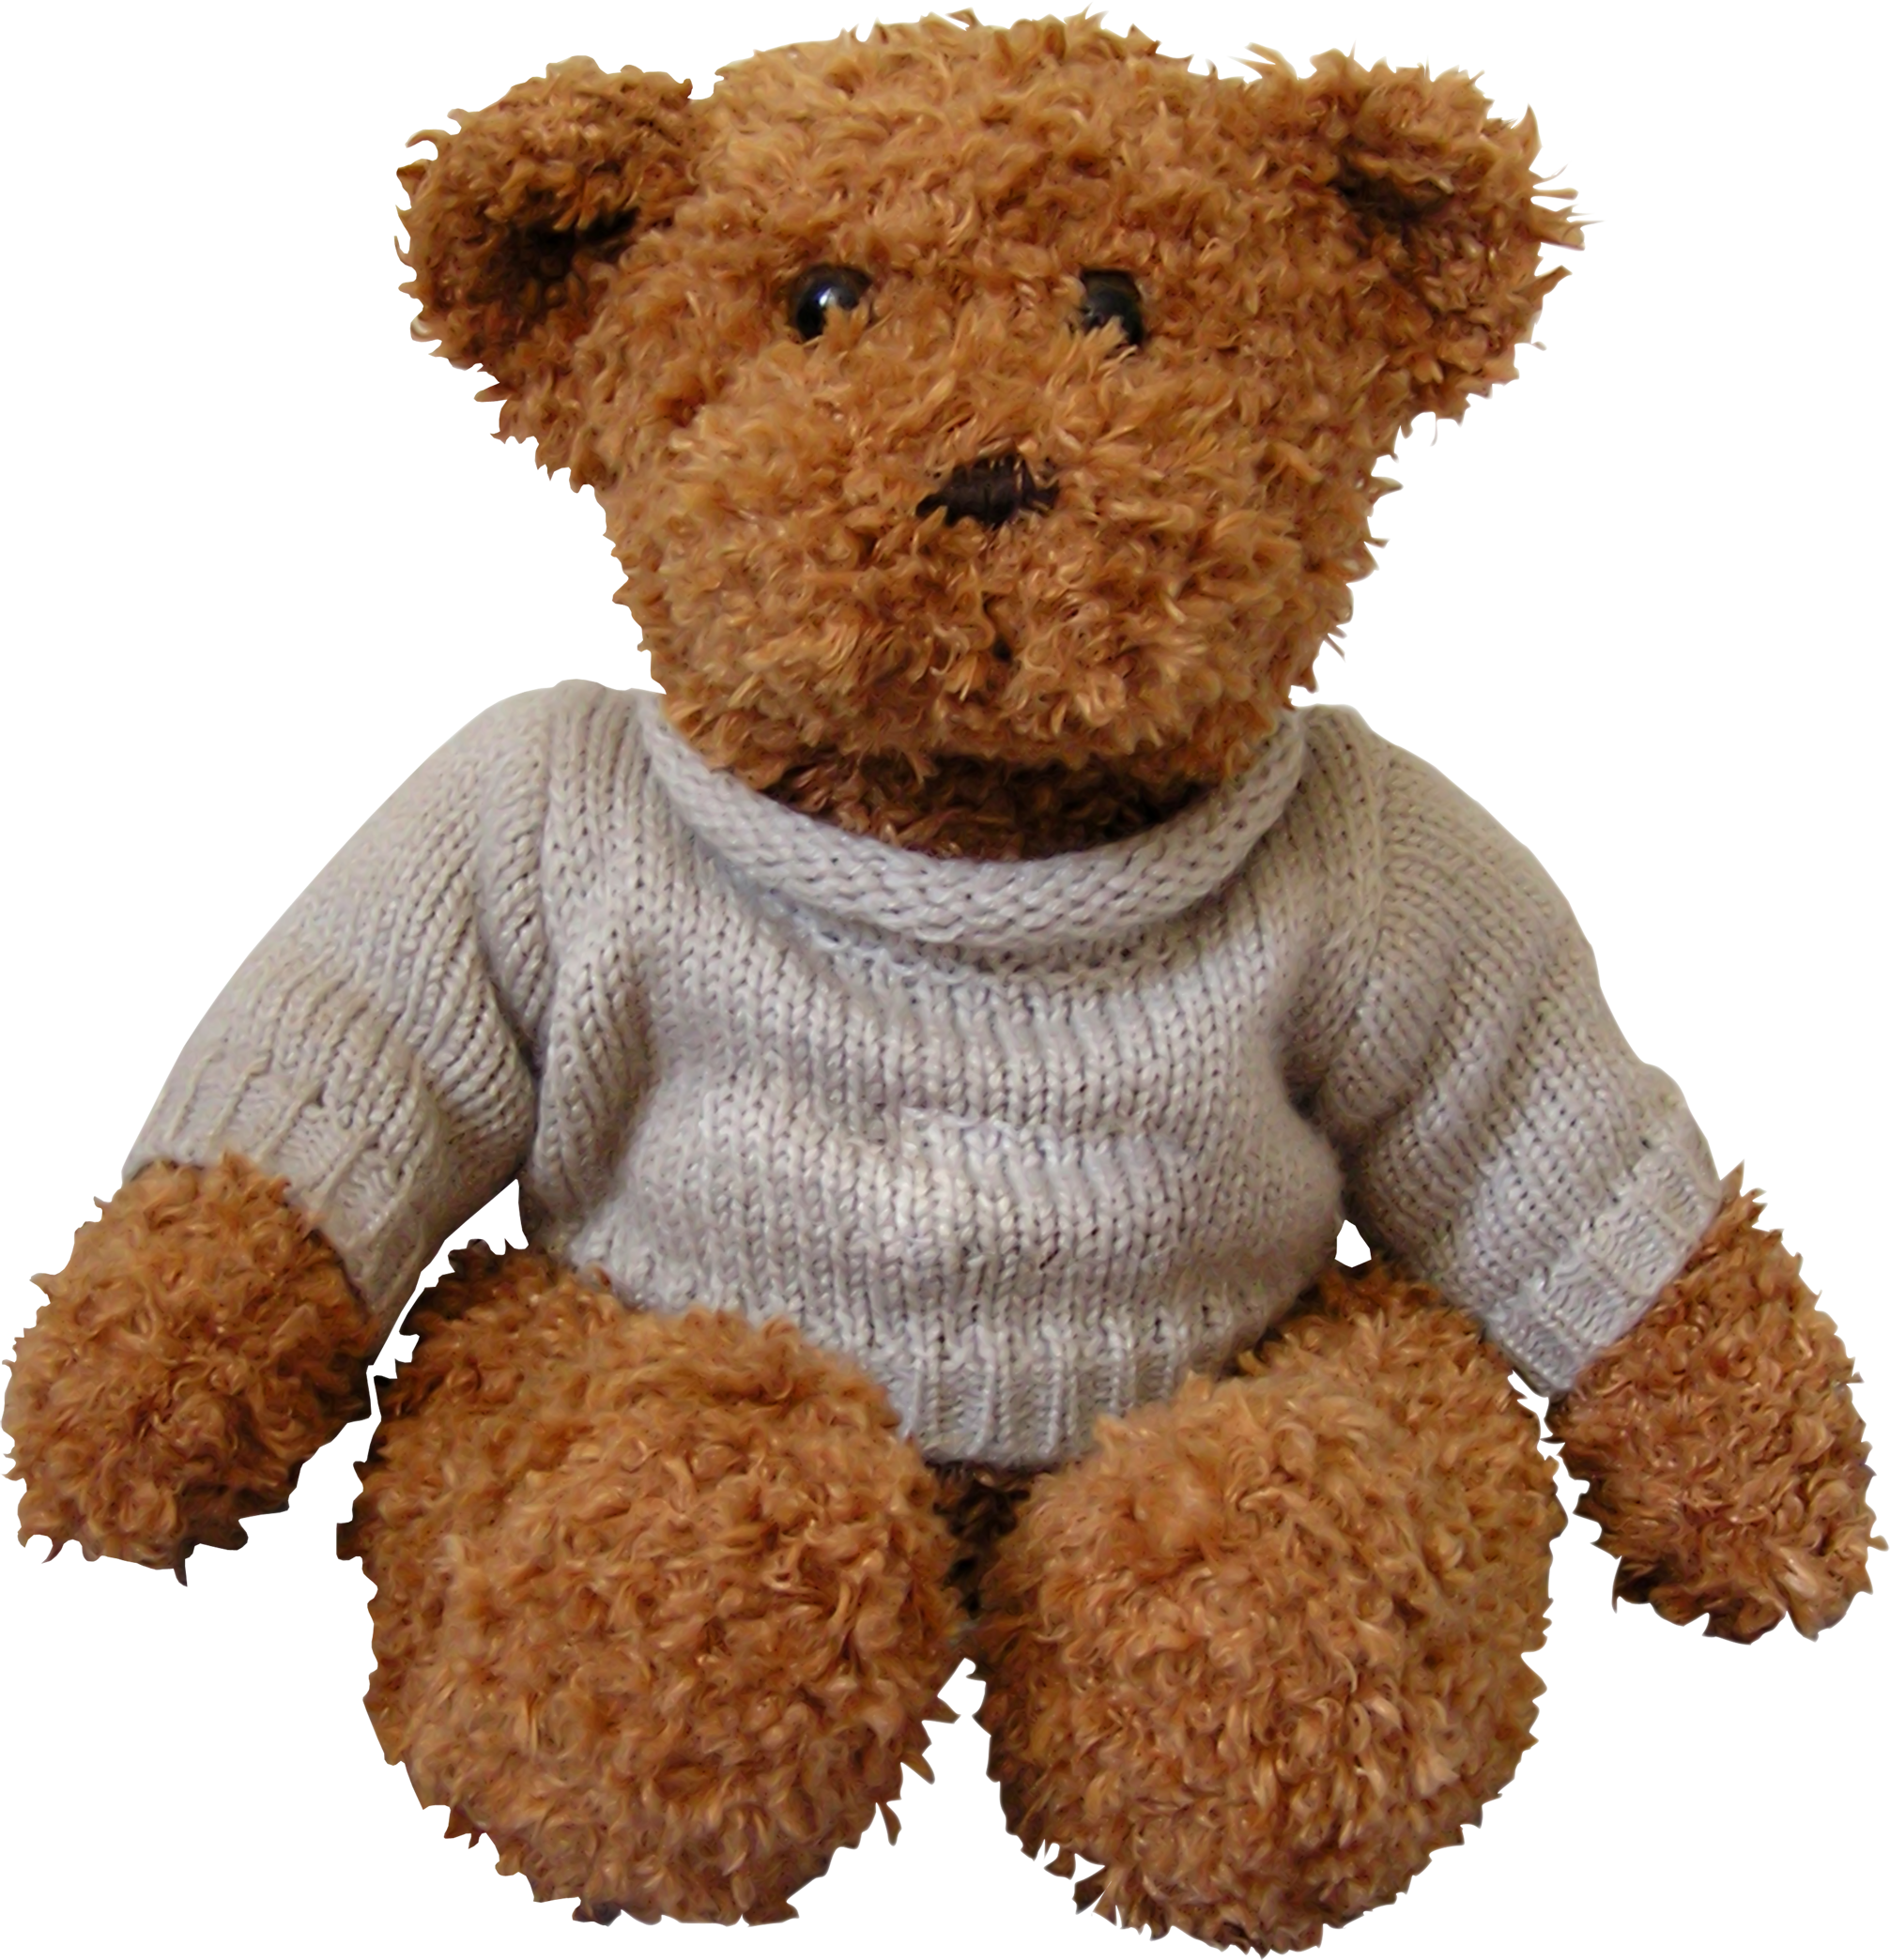 Teddy Bear Png Hd PNG Image